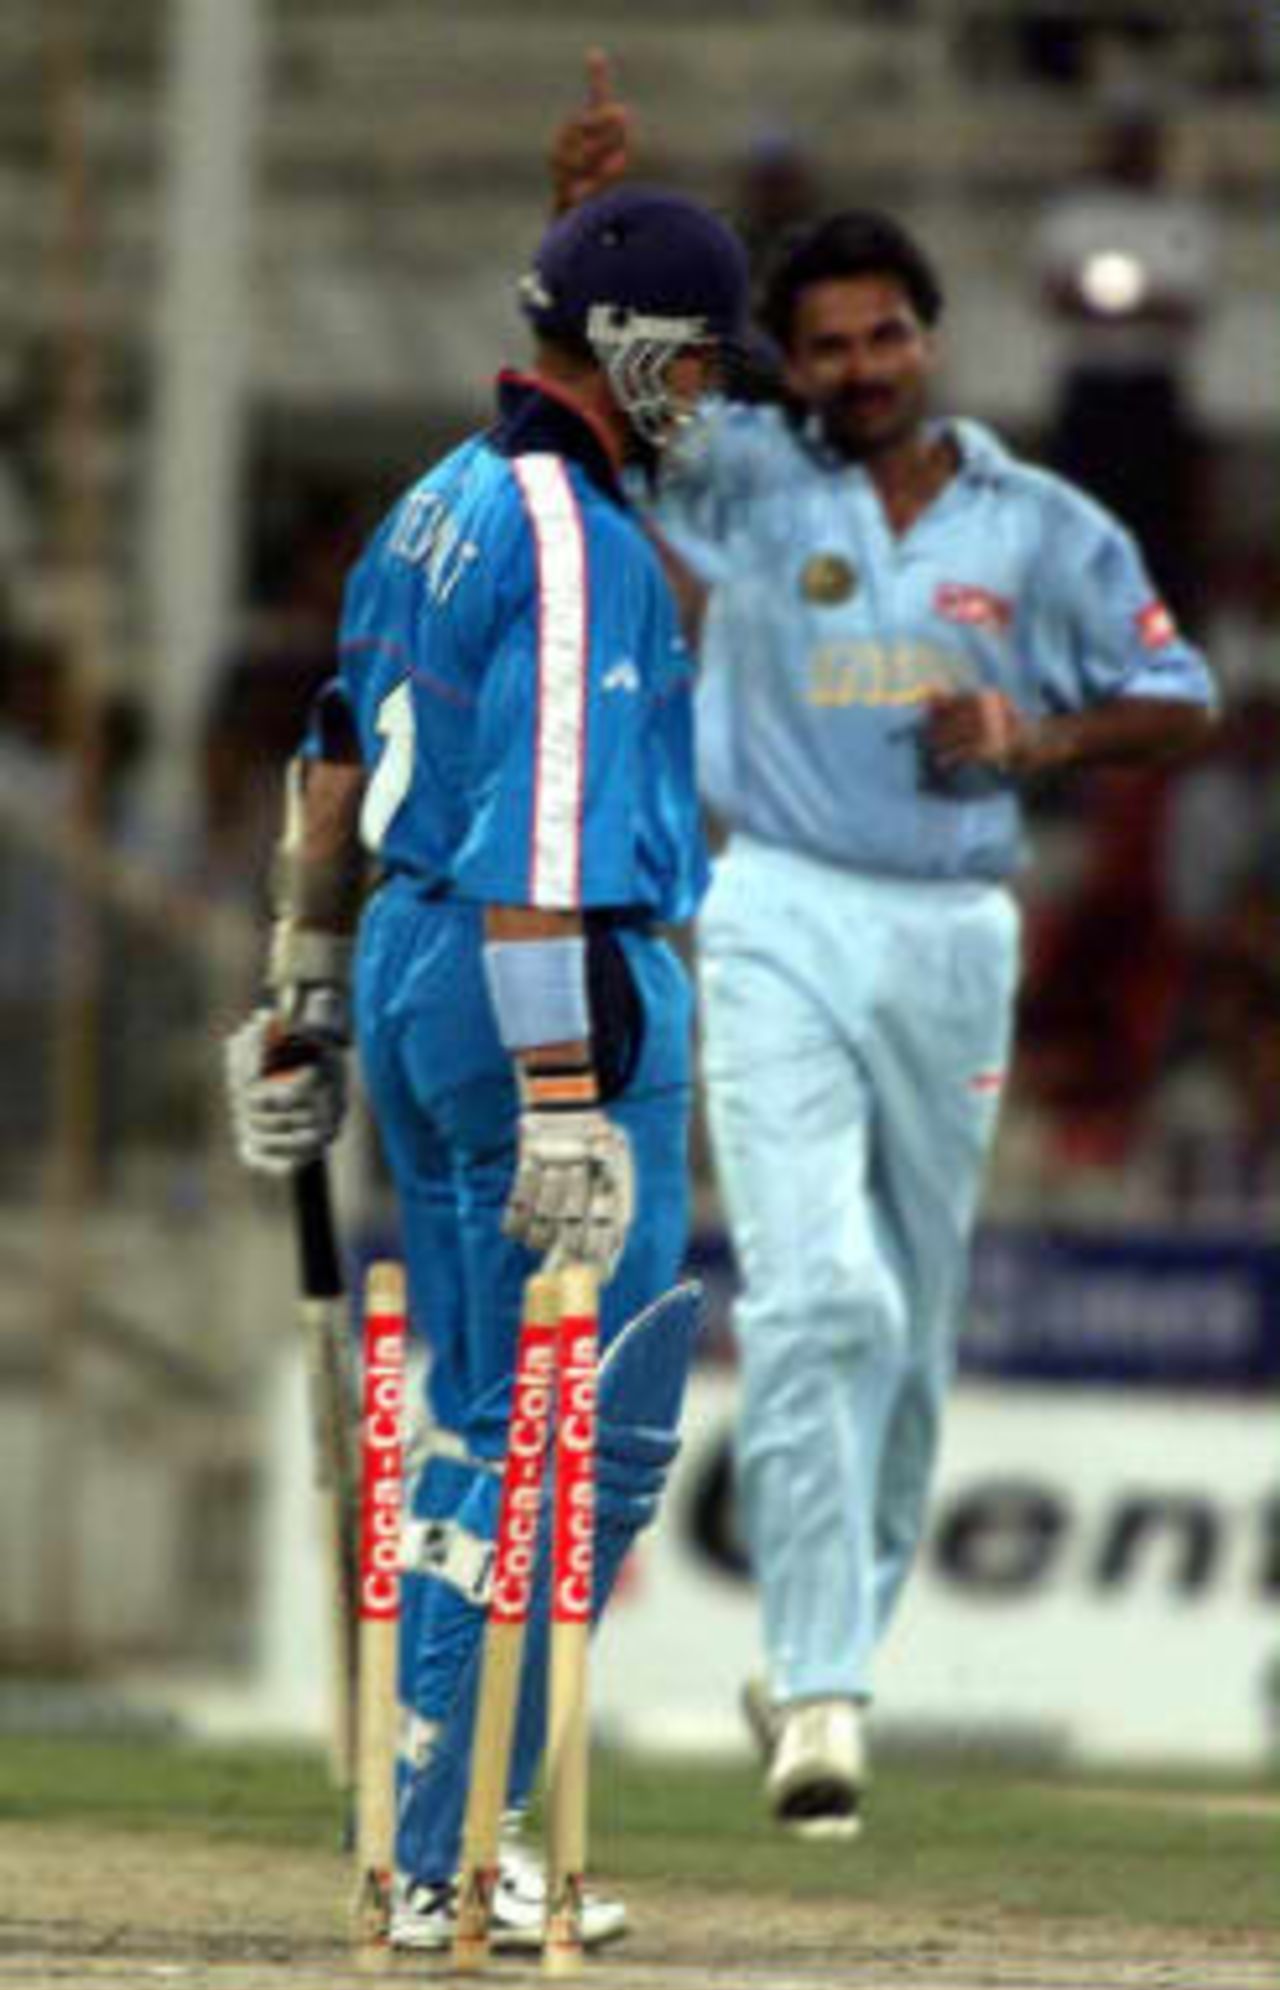 England captain Alec Stewart is bowled for 11 by Javagal Srinath in the 3rd match of the Coca Cola Cup on 9th April held in Sharjah